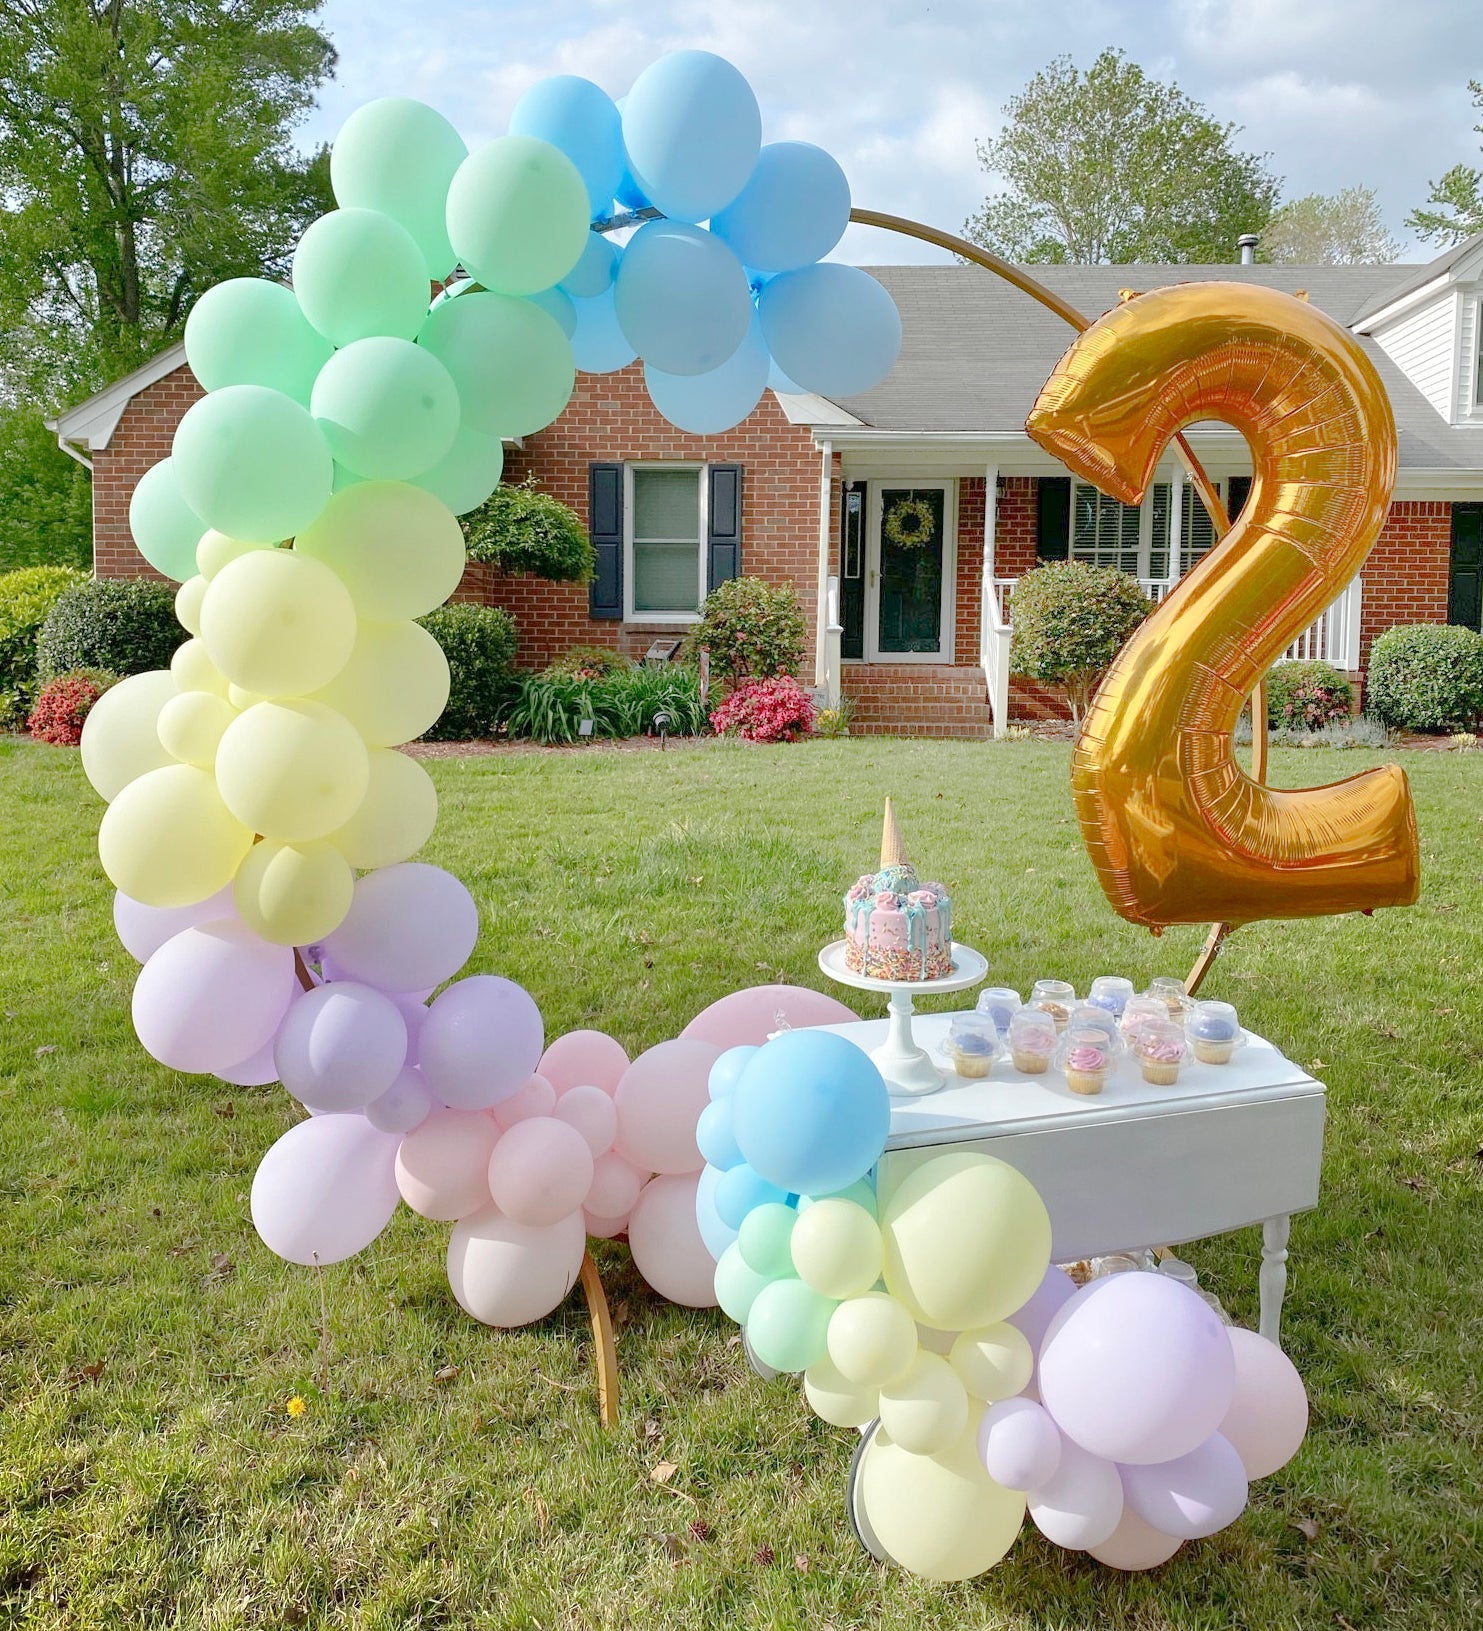 8 Most Popular 2nd Birthday Themes for Your Toddler